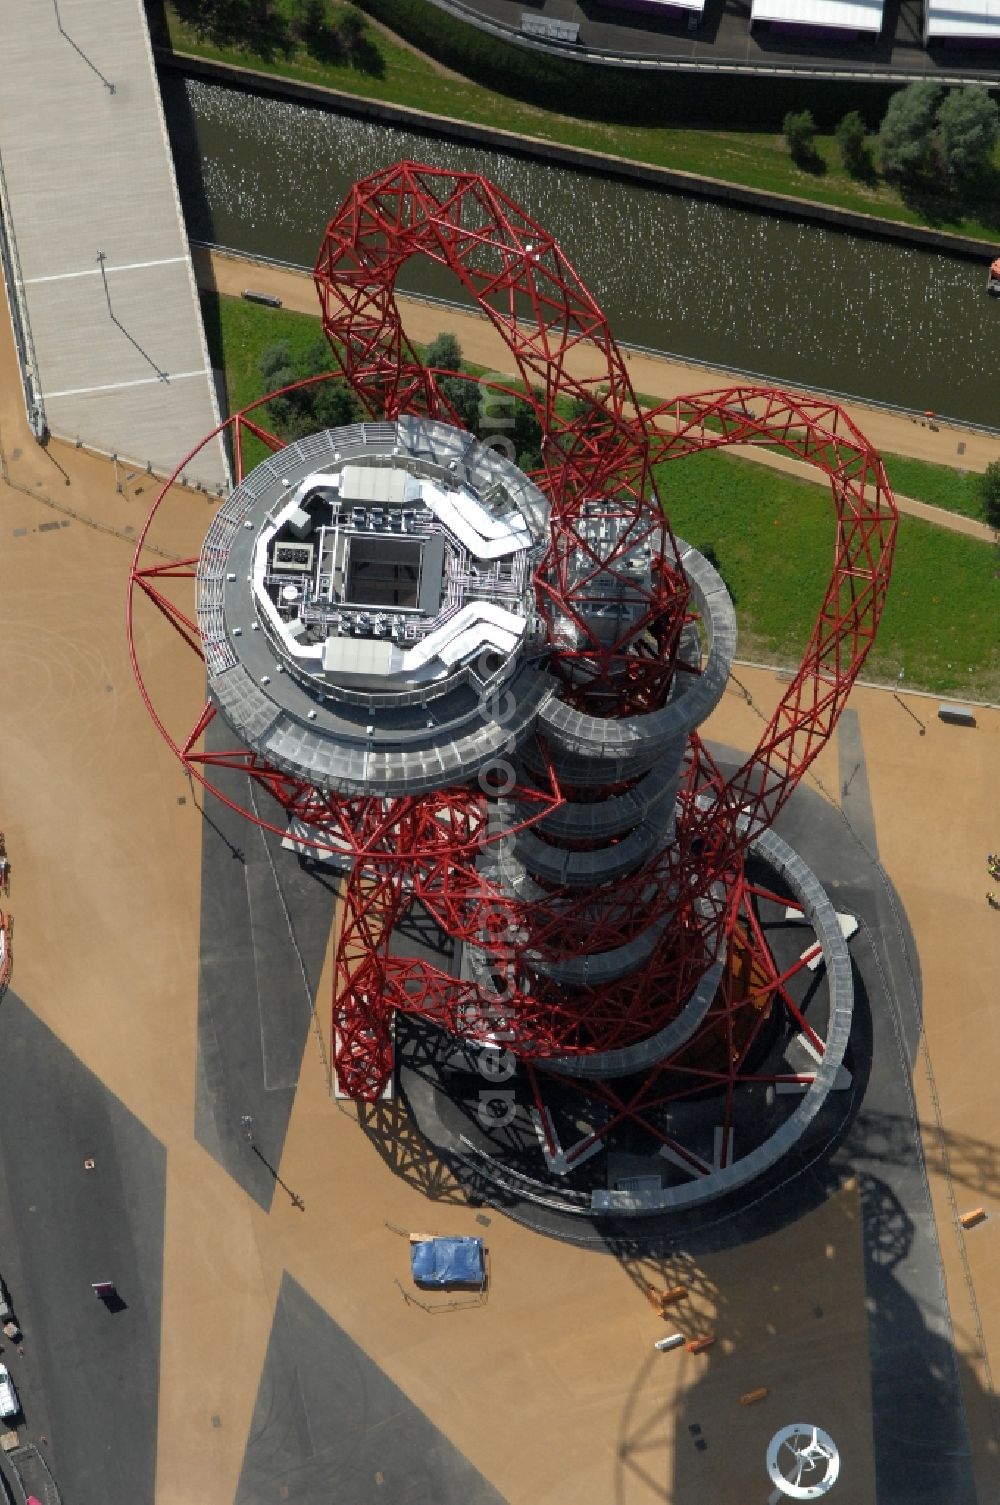 London from the bird's eye view: The ArcelorMittal Orbit is a 115-metre-high ( 377 ft ) observation tower in the Olympic Park in Stratford, London and is intended to be a permanent, lasting legacy of the Olympic and Paralympic Games 2012 in Great Britain